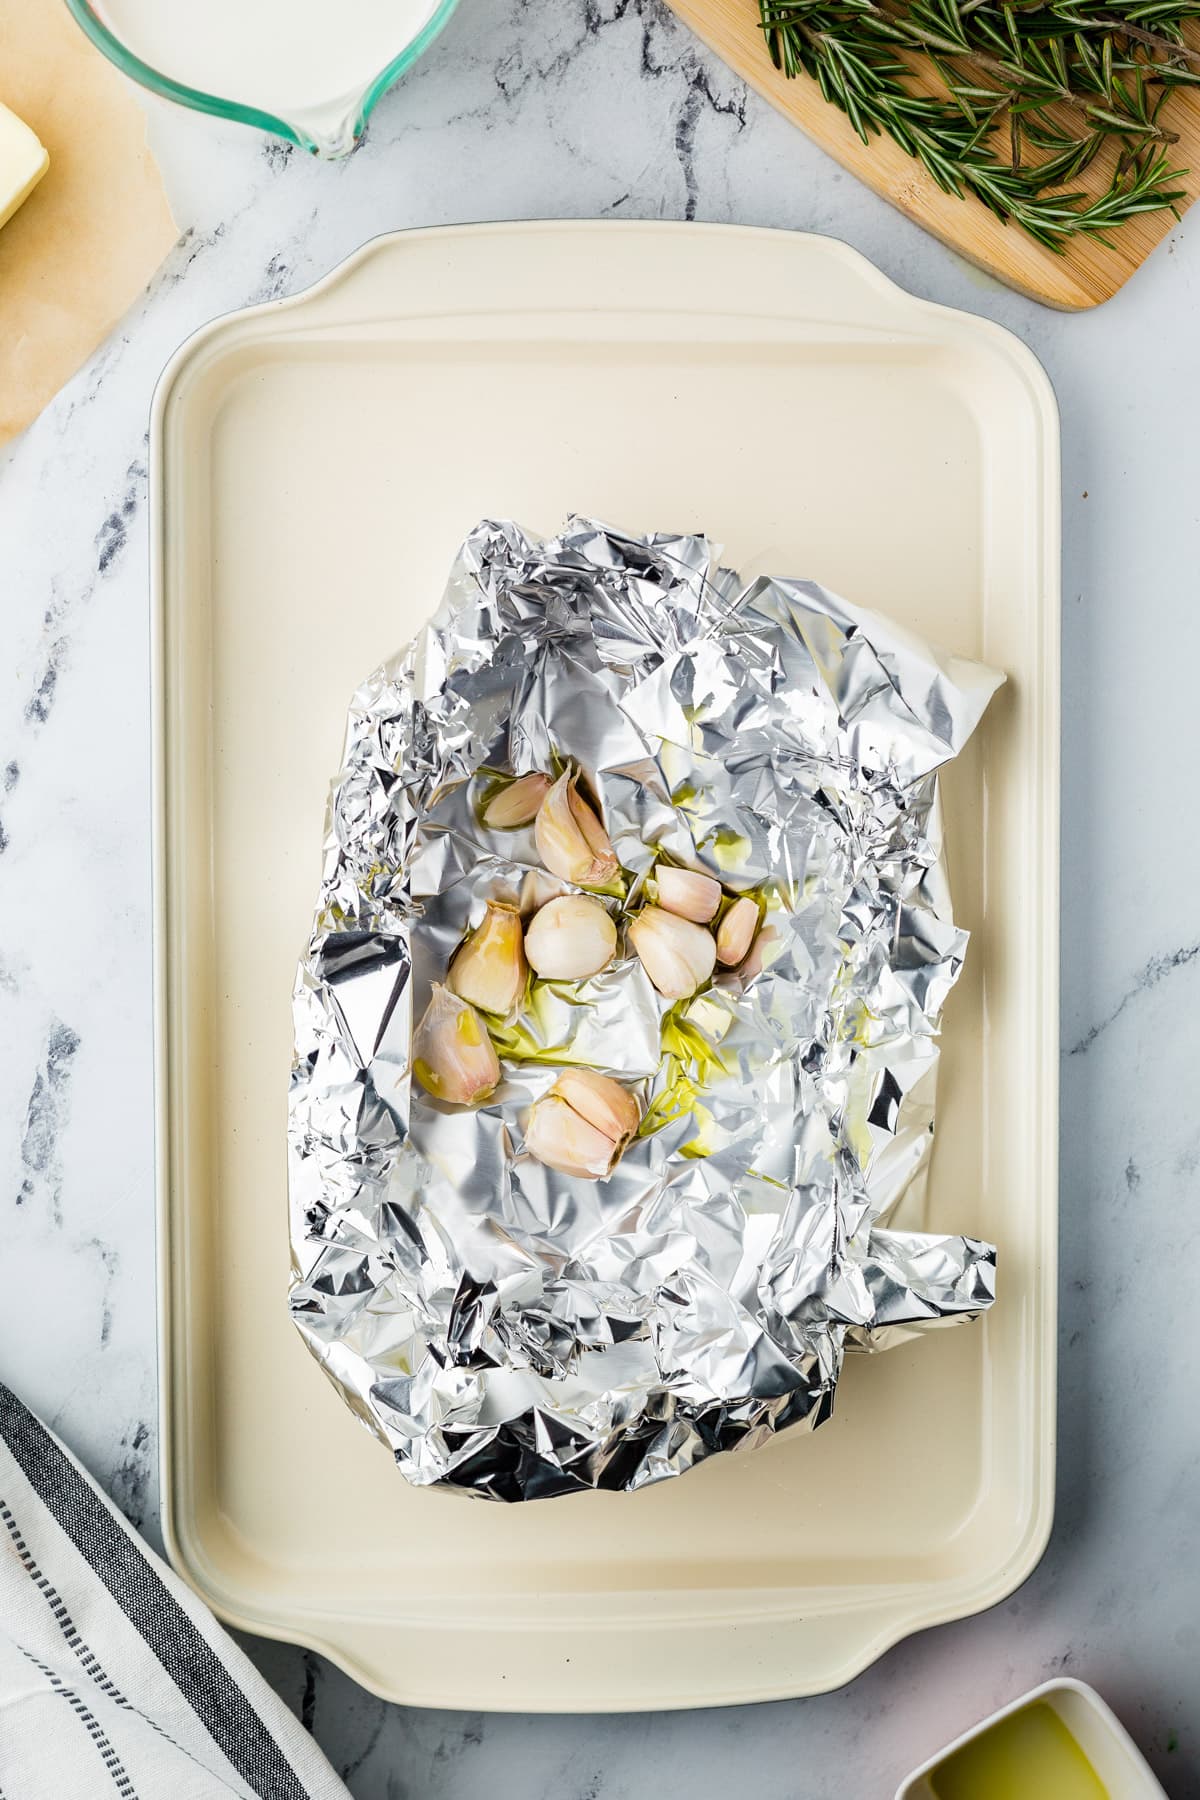 Foil with garlic and herbs on a marble countertop.